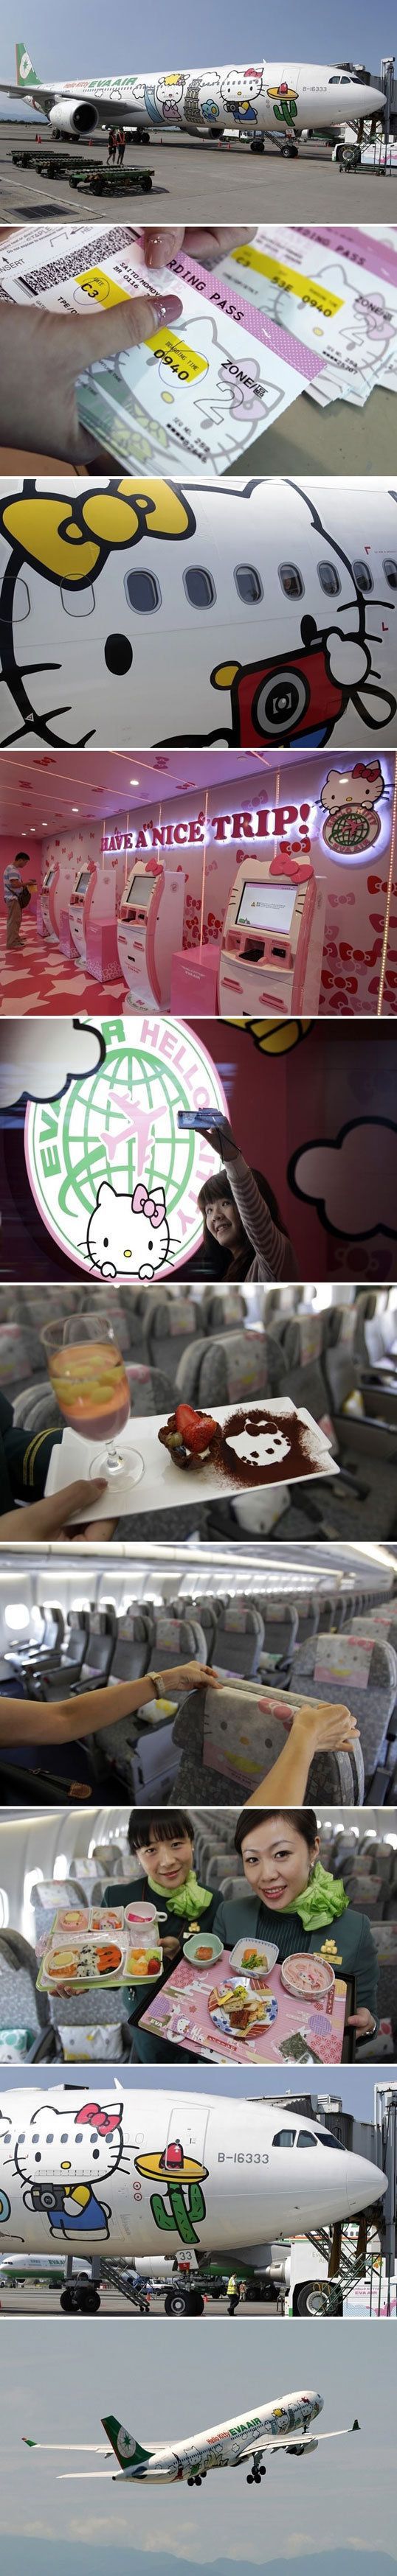 Hello Kitty Airline!!!!! ♥